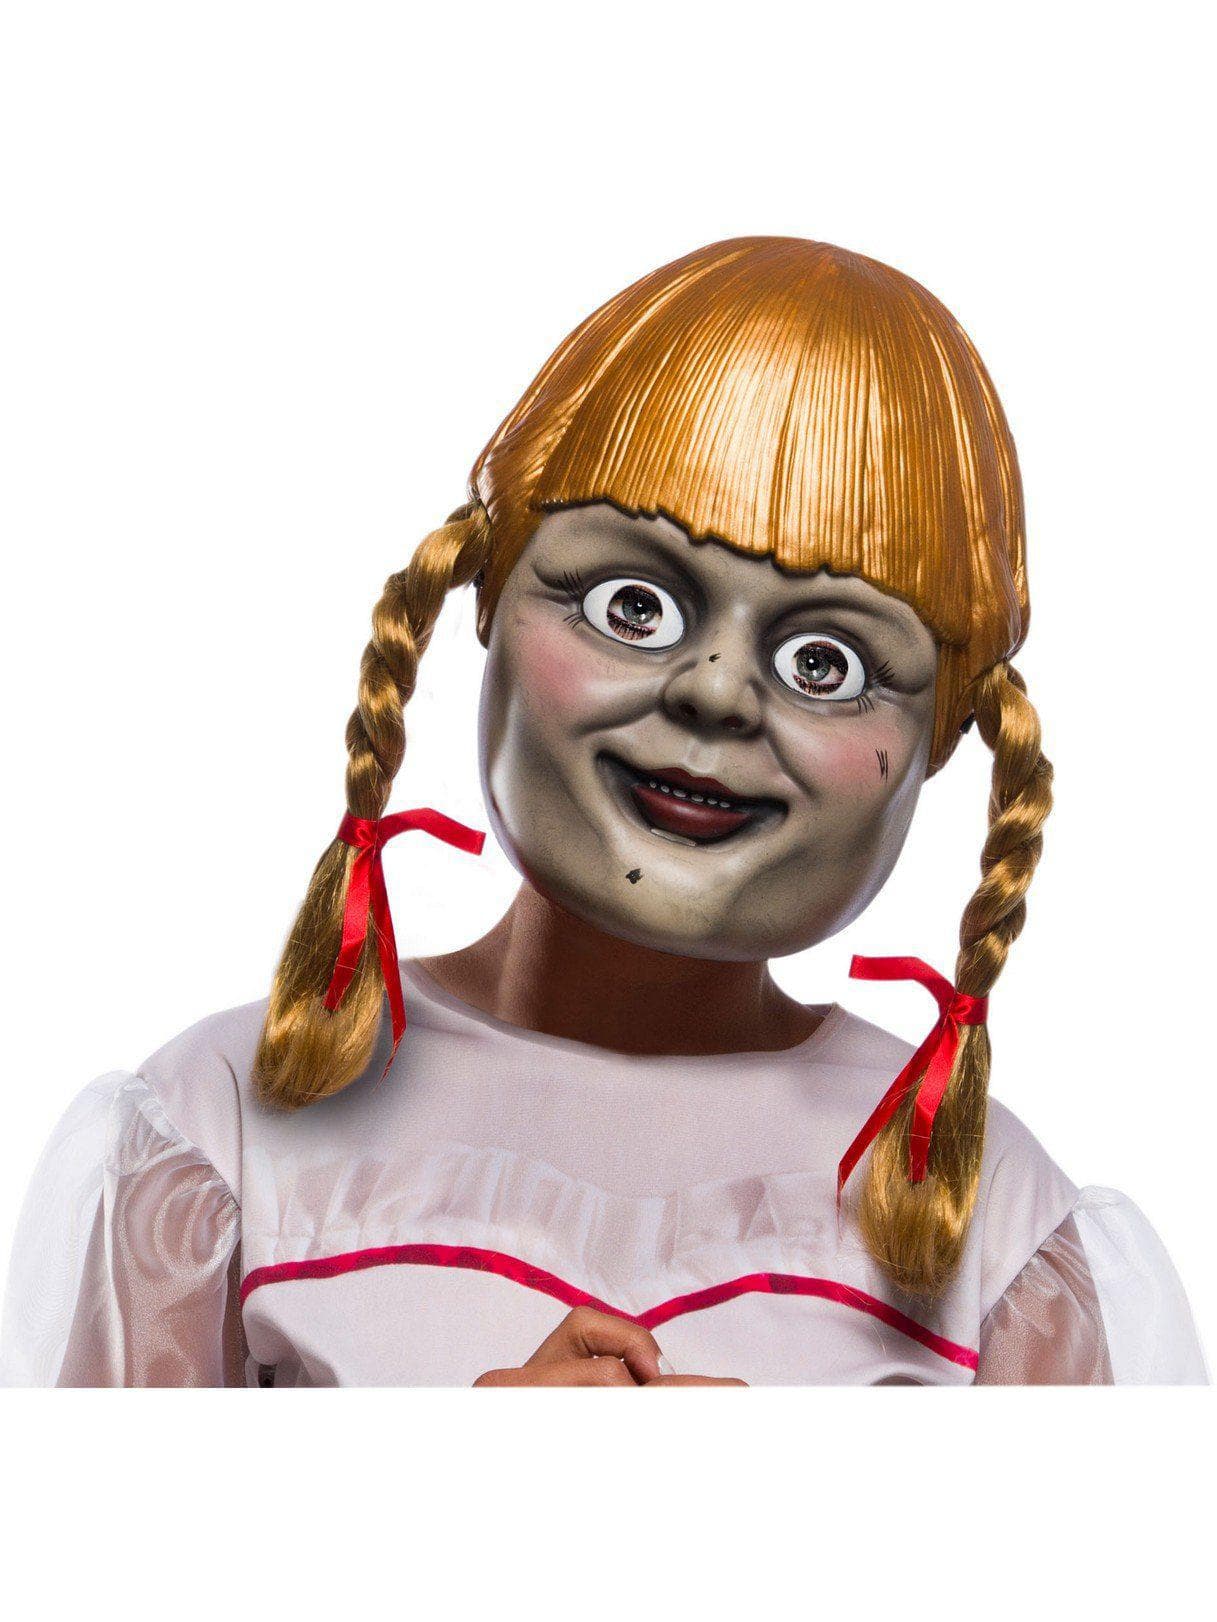 Adult Annabelle 3: Annabelle Mask - costumes.com